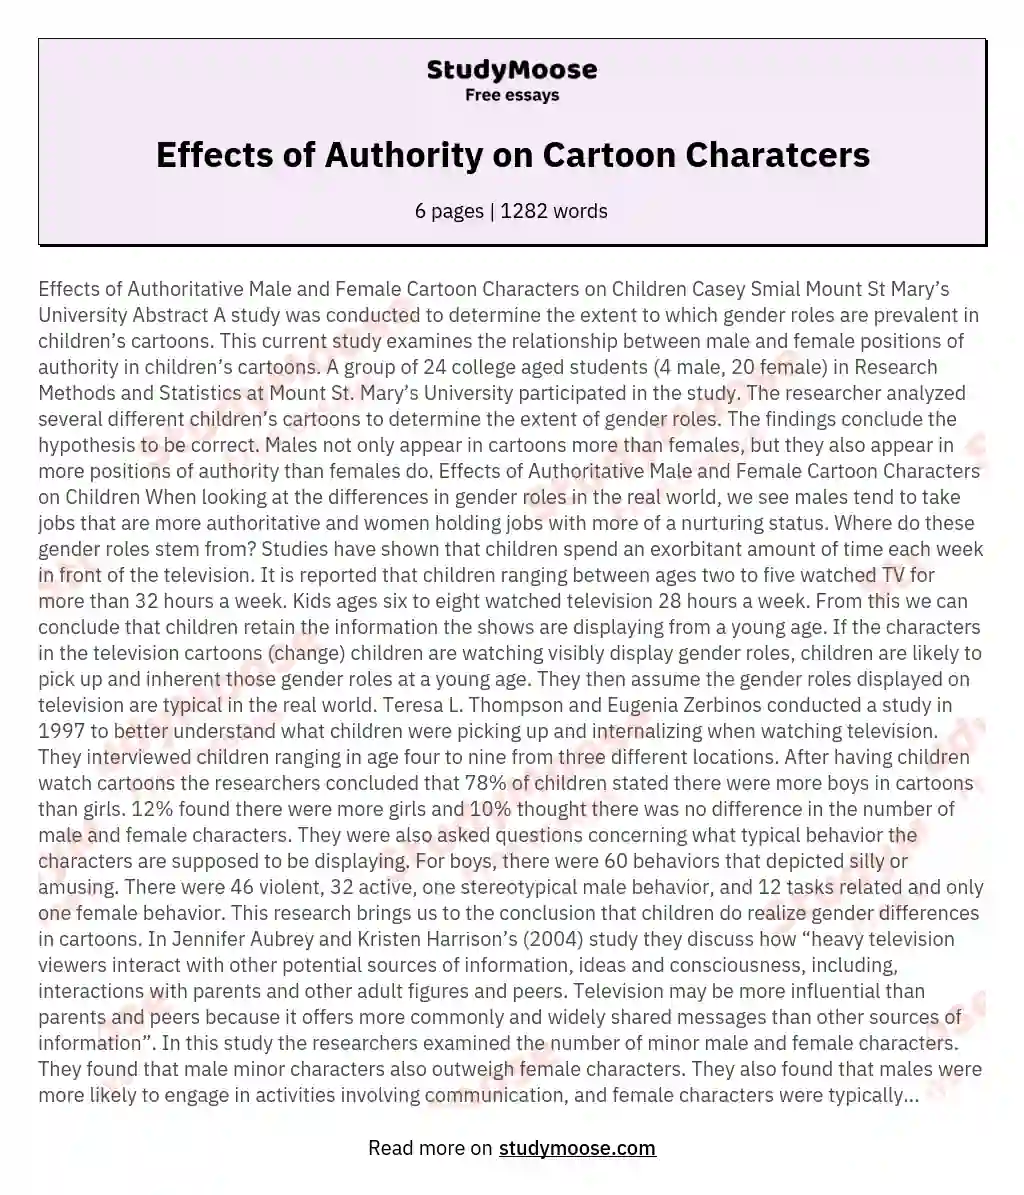 Effects of Authority on Cartoon Charatcers essay